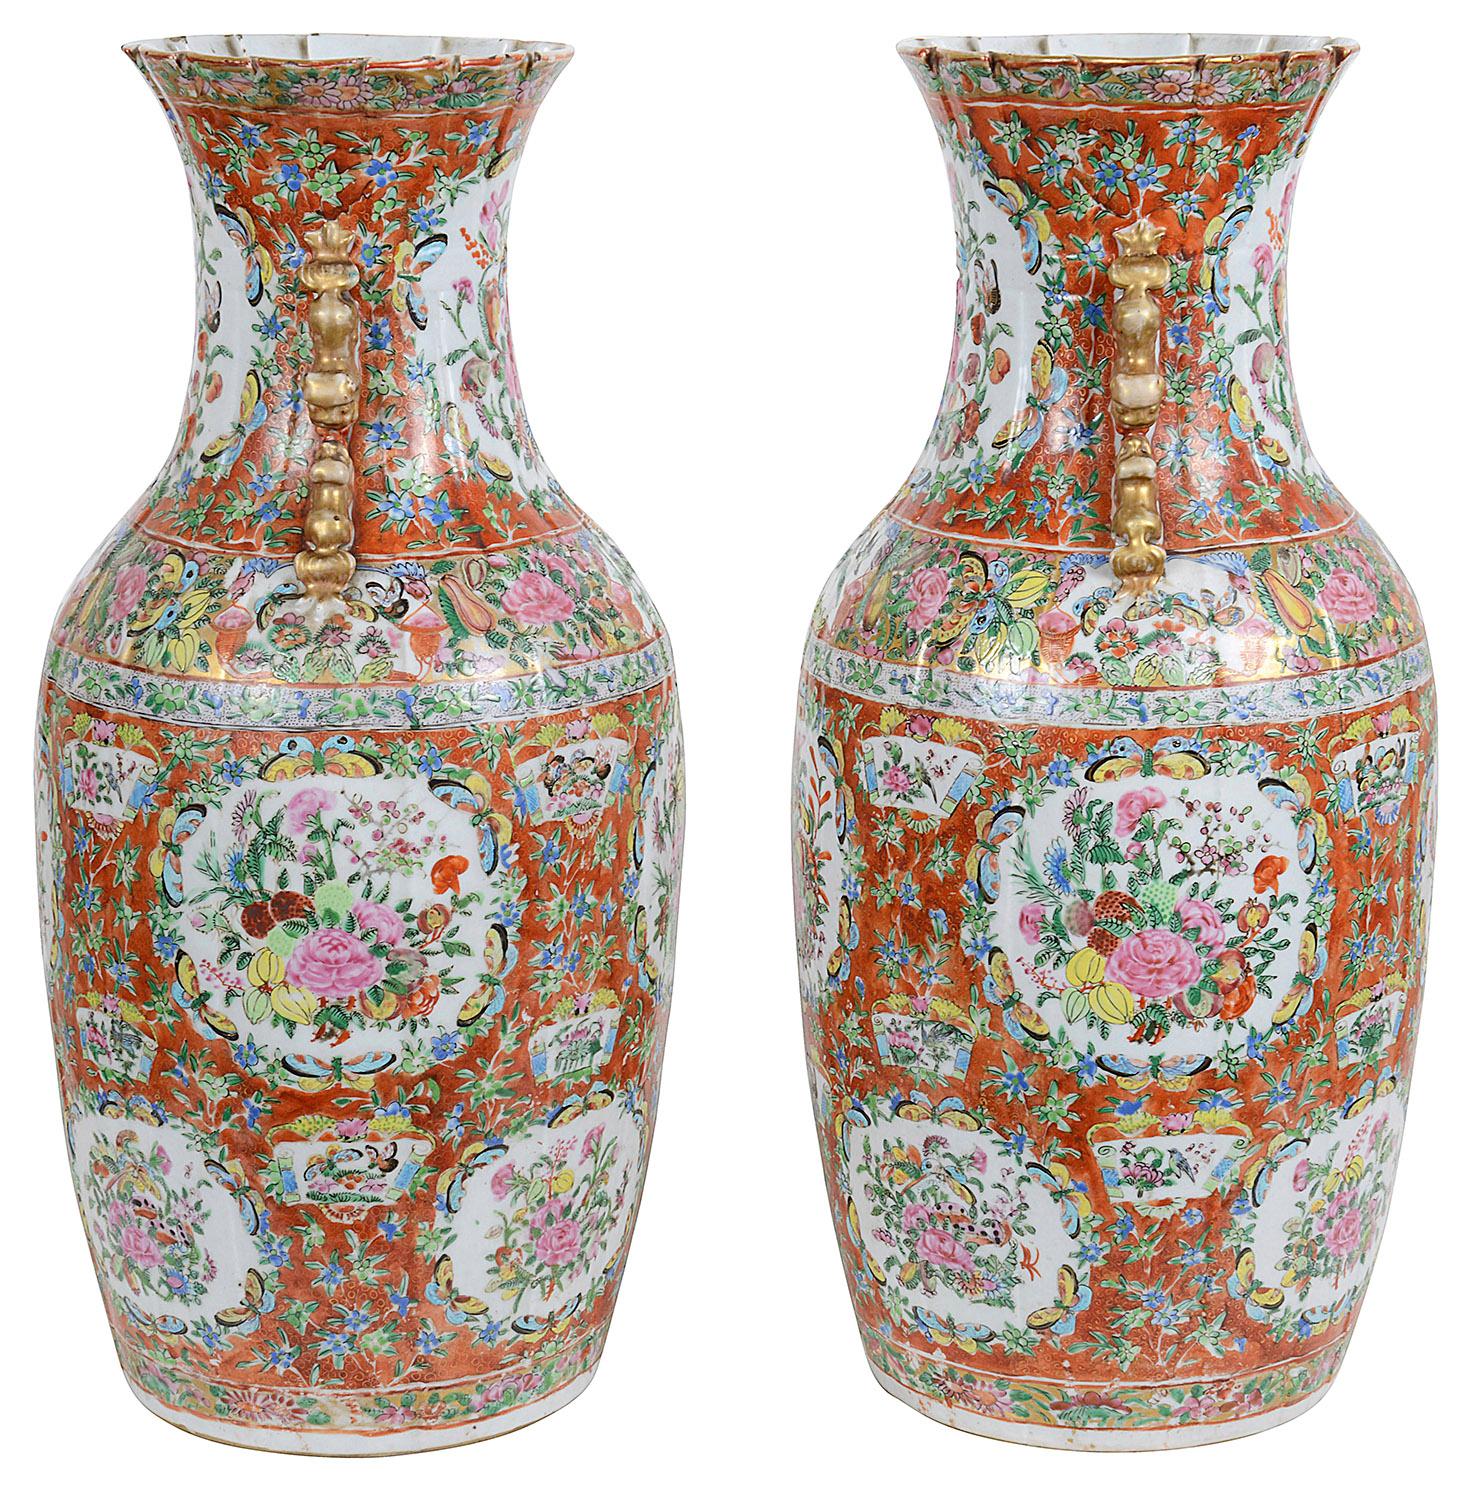 Hand-Painted Pair of 19th Century Rose Medallion Vases / Lamps